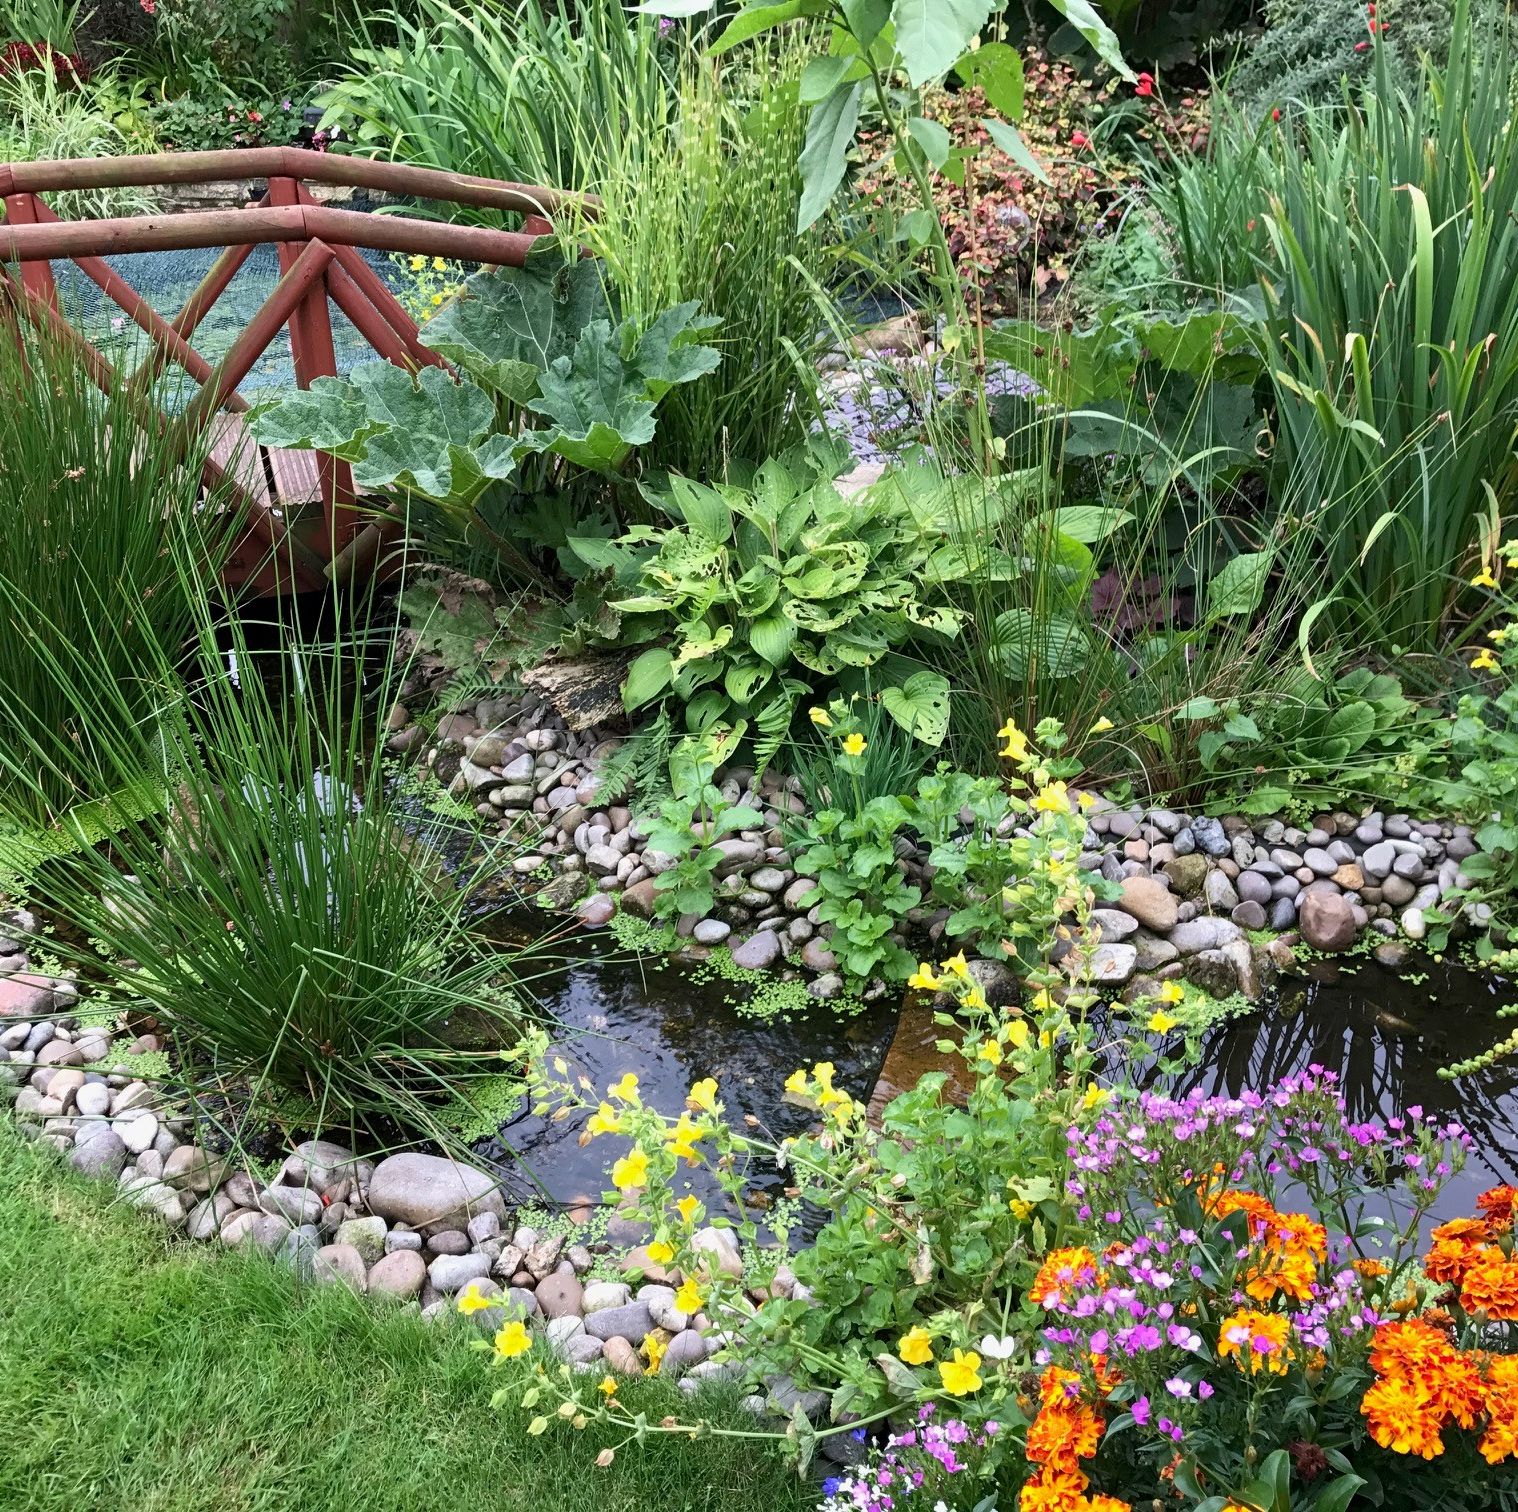 How to build your own garden pond